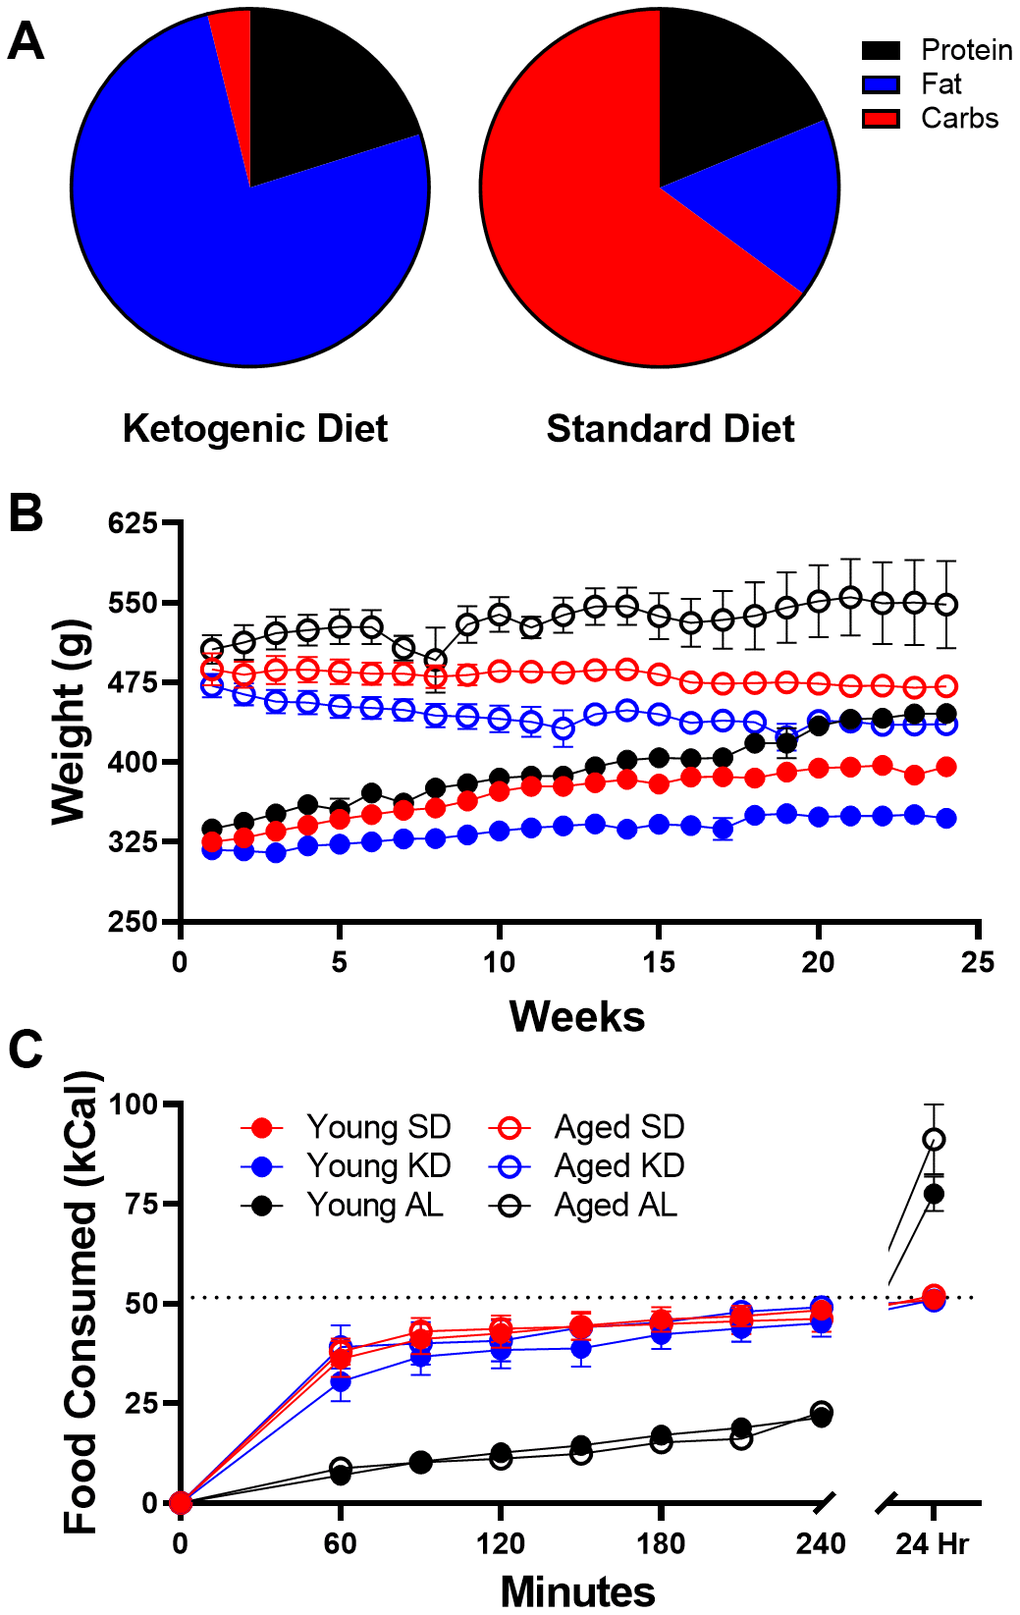 Dietary implementation. (A) Ketogenic (KD) and standard diet (SD) macronutrient compositions. (B) Weight significantly differed across age groups throughout the study, but most notably was significantly different in ad libitum (AL) fed rats relative to time restricted fed (TRF) rats. (C) The number of kcal significantly differed across the two feeding methods, as ad libitum-fed rats consumed at a slower rate than TRF rats, but consumed significantly more during a 24 hour period. Dotted line indicates kcal allotment given to TRF groups (~51 kcal). Data are represented as group mean {plus minus}1 standard error of the mean (SEM). In panels (B, C) ad libitum n = 6 young, n = 5 aged; TRF standard diet n = 7 young, n = 5 aged; TRF ketogenic diet n = 7 young, n = 4 aged.